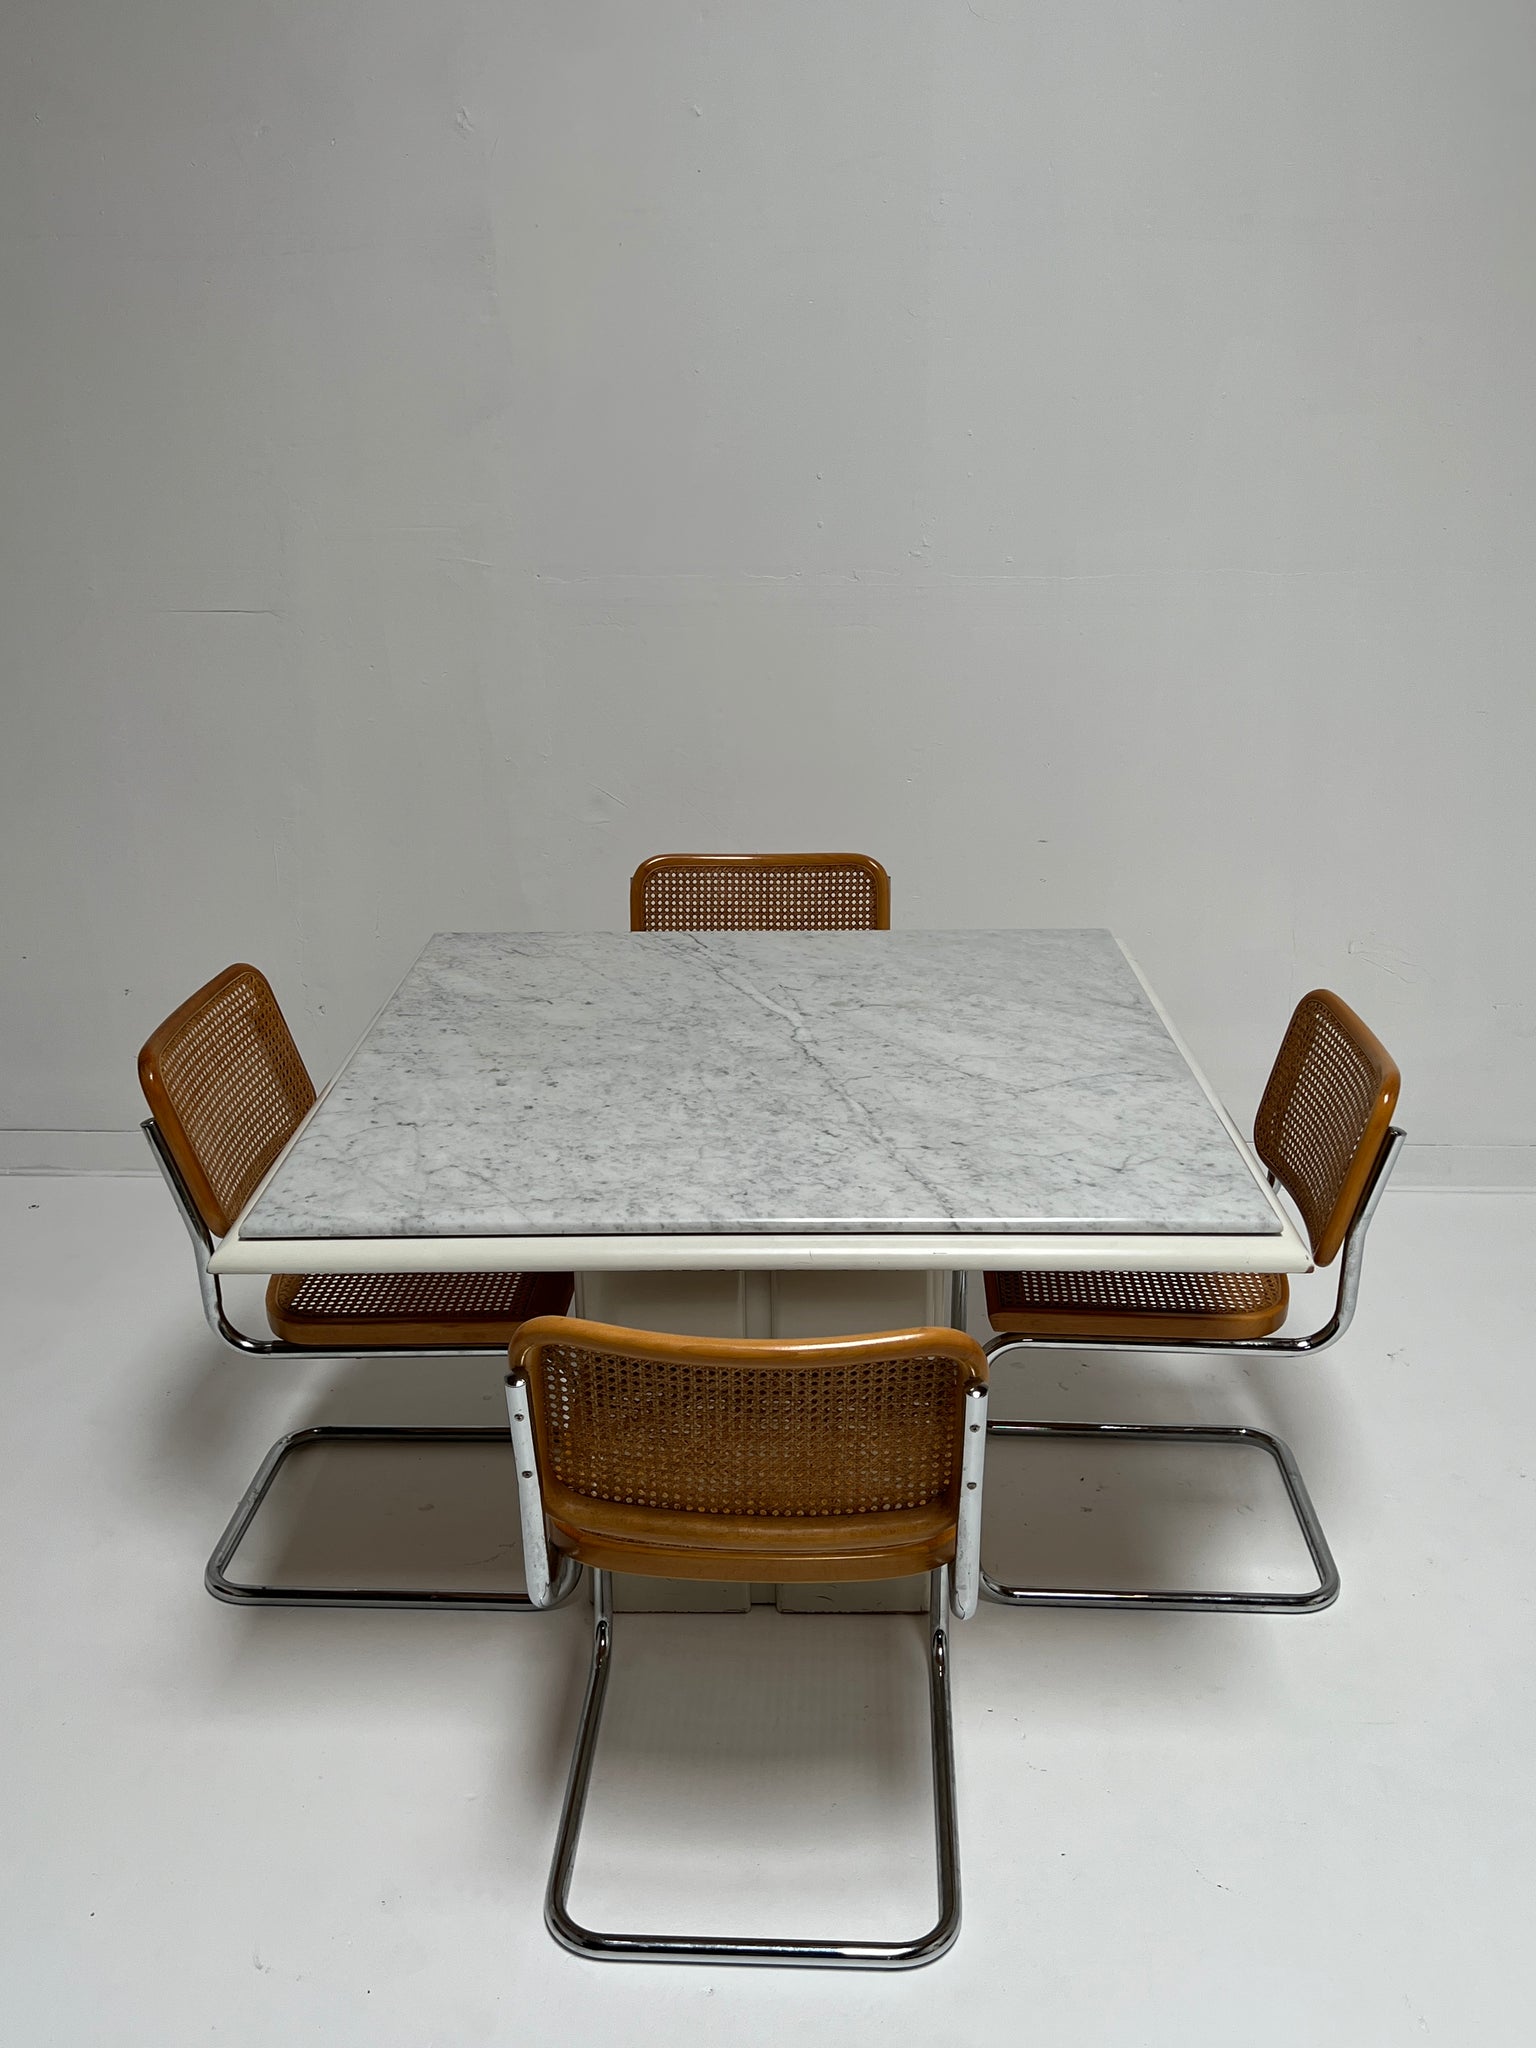 White Marble Pedestal Dining Table